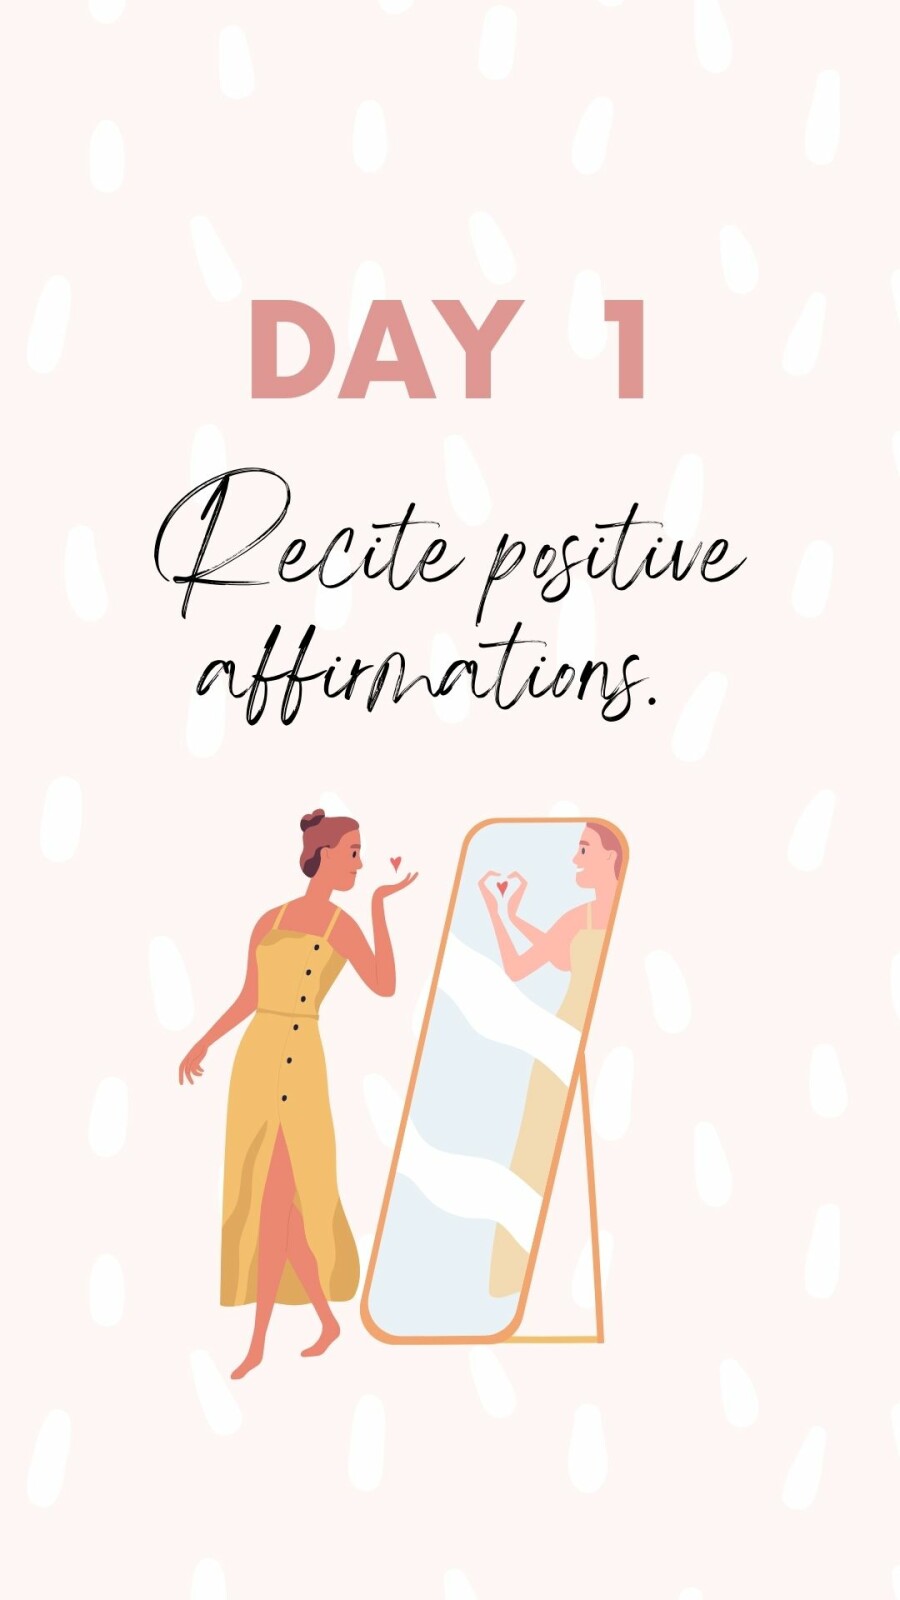 Self Love 101  How to use positive affirmations - Day 1